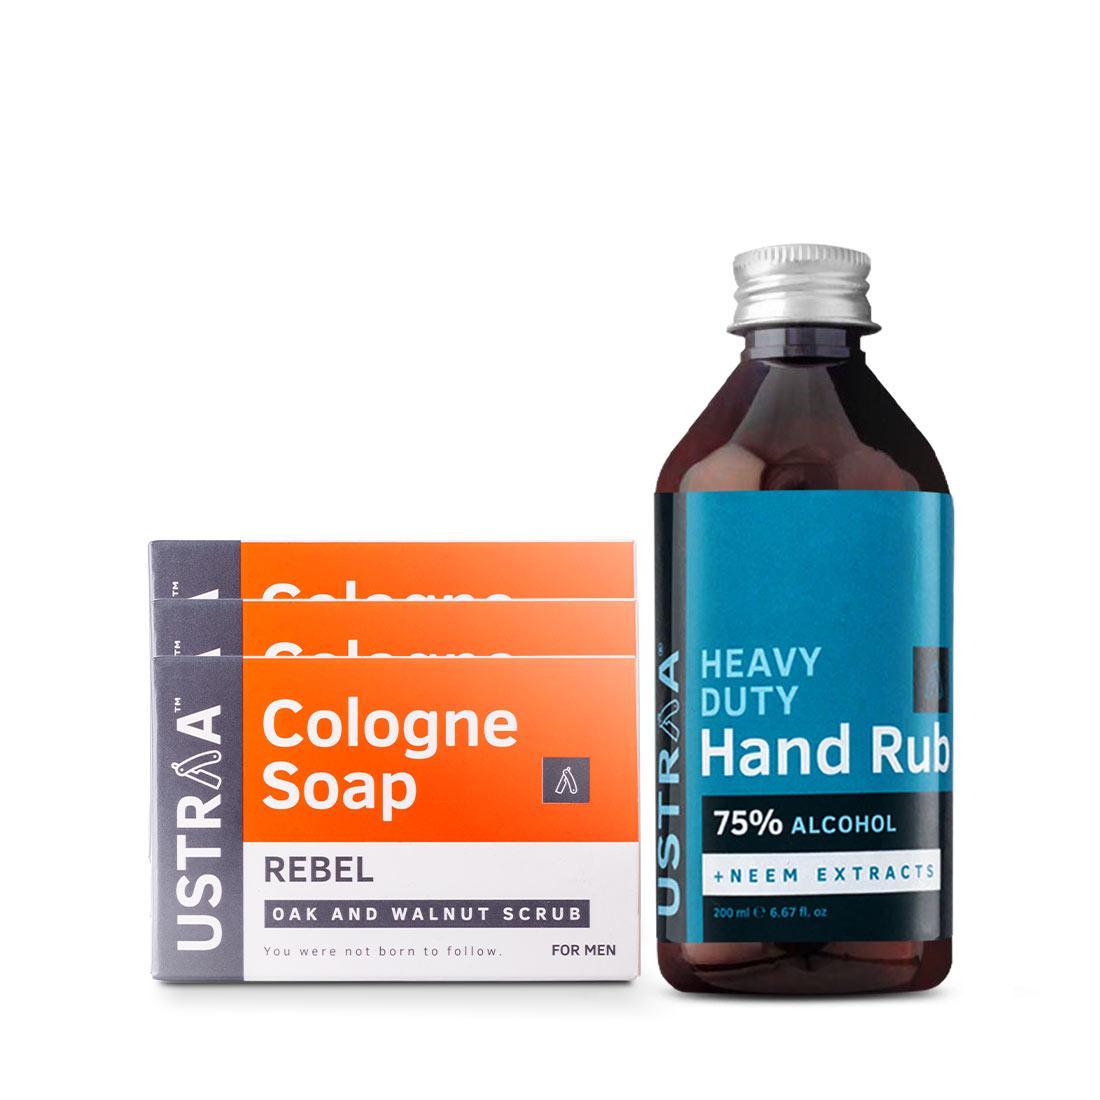 Cologne Soap - Rebel - Set of 3 and Hand Rub - 200 ml